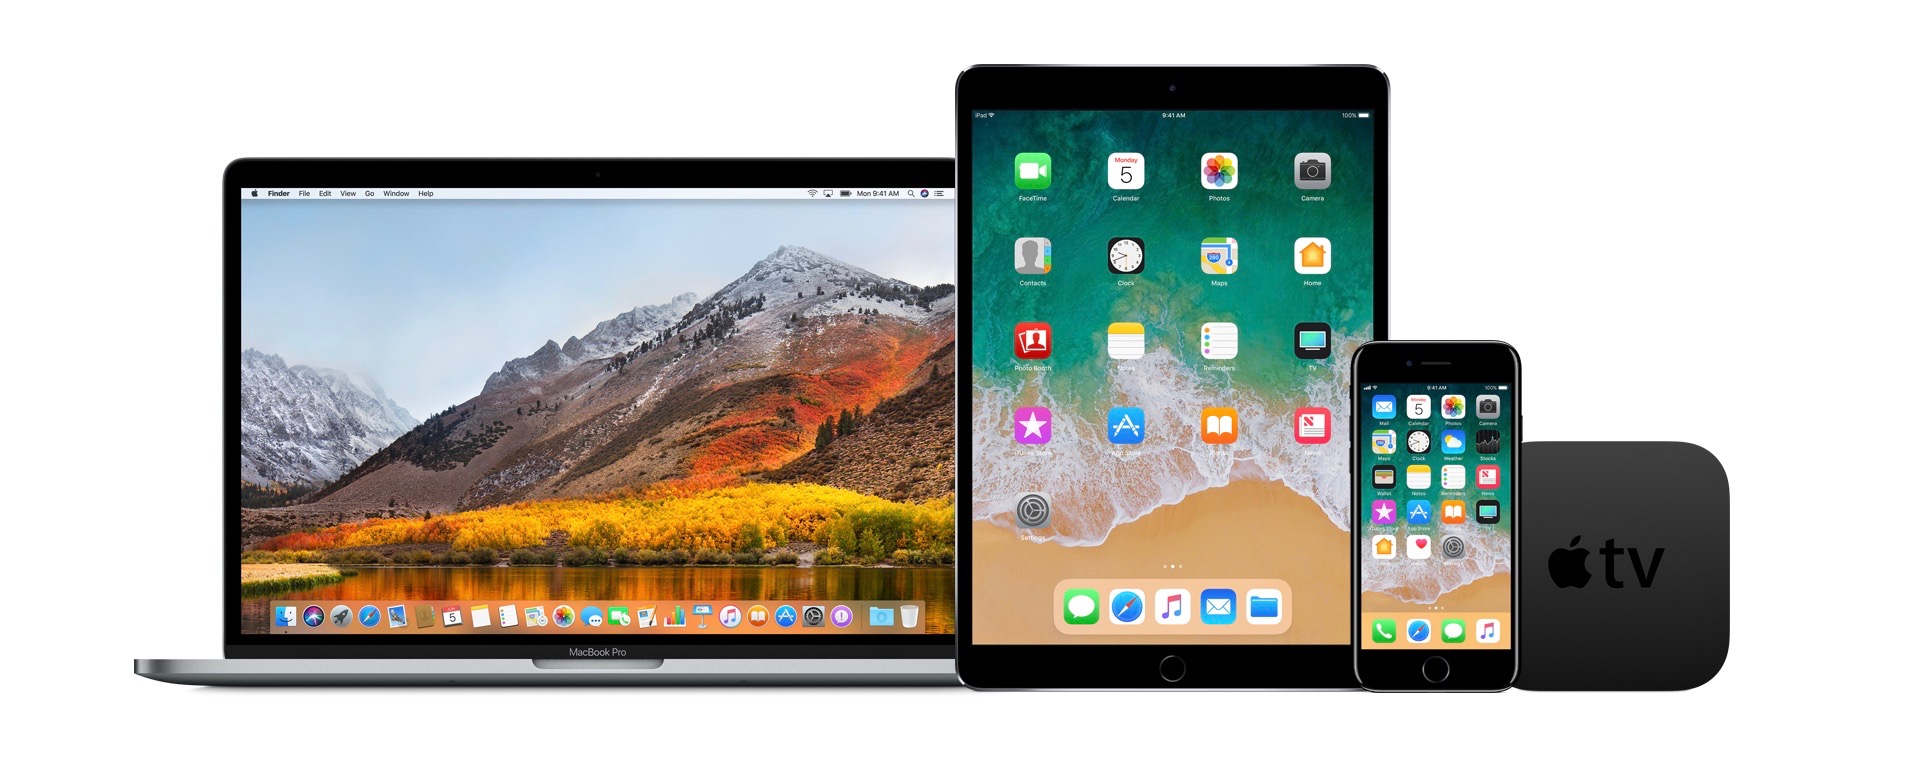 can you access apps designed for ipad and phone on a mac book